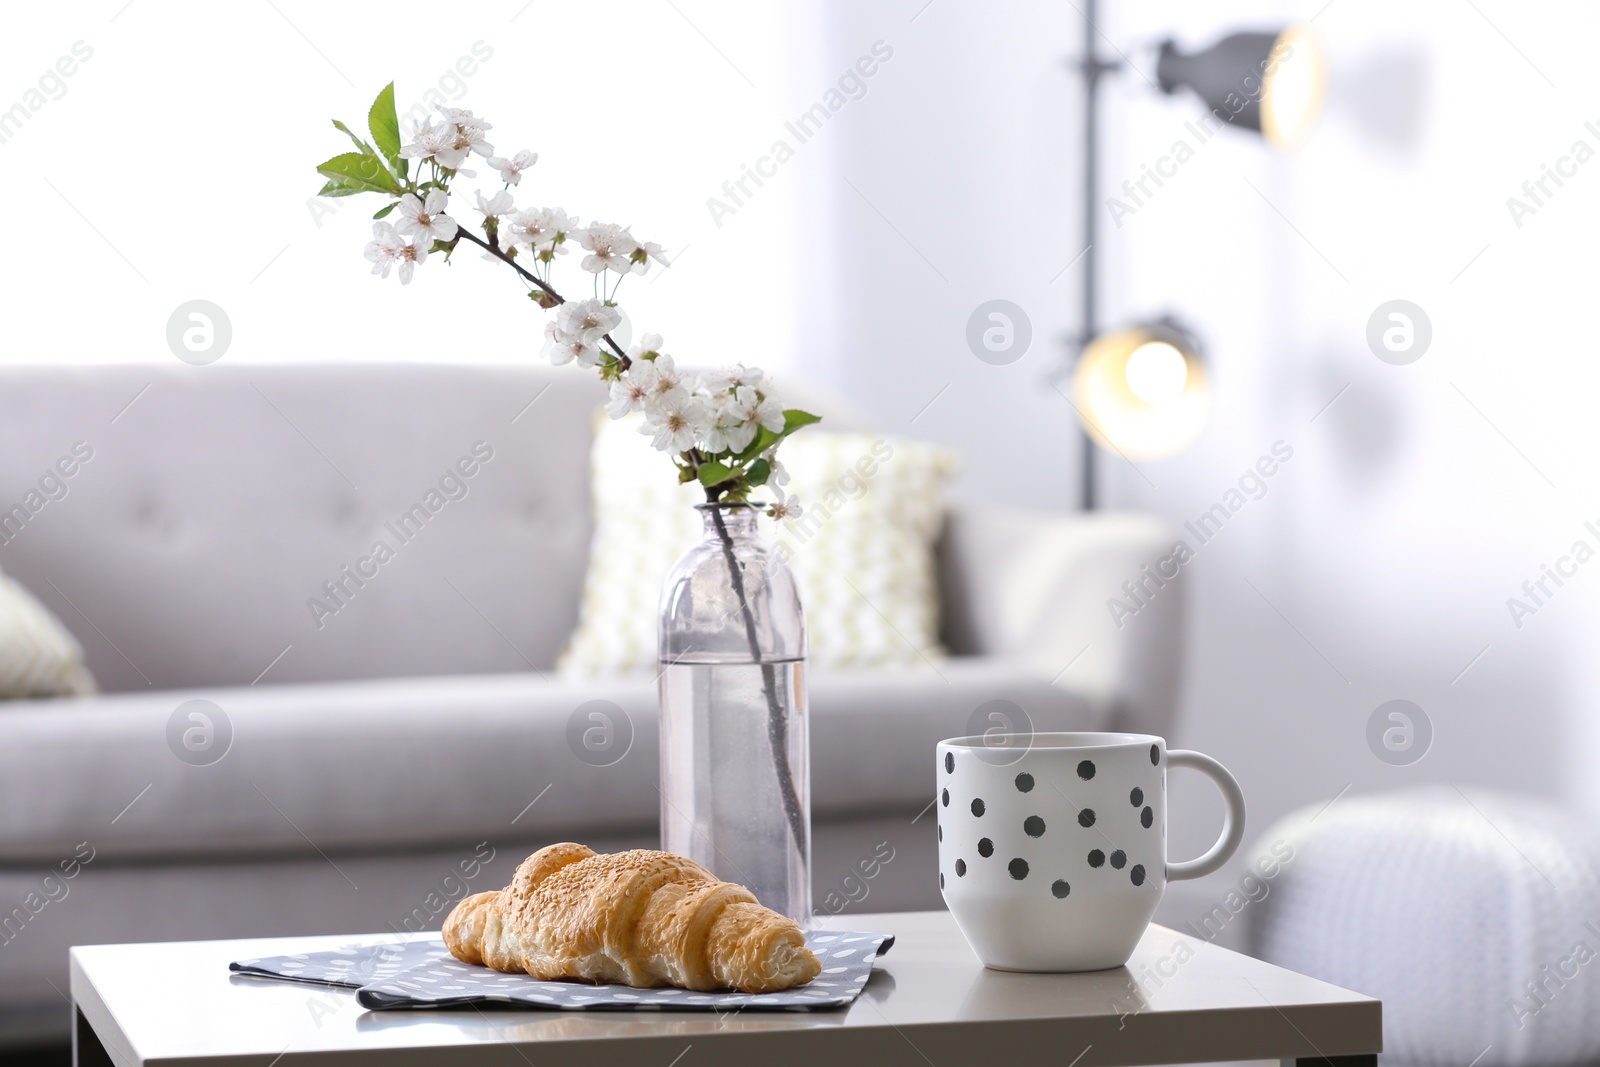 Photo of Fresh croissant, cup and flowers on table in room